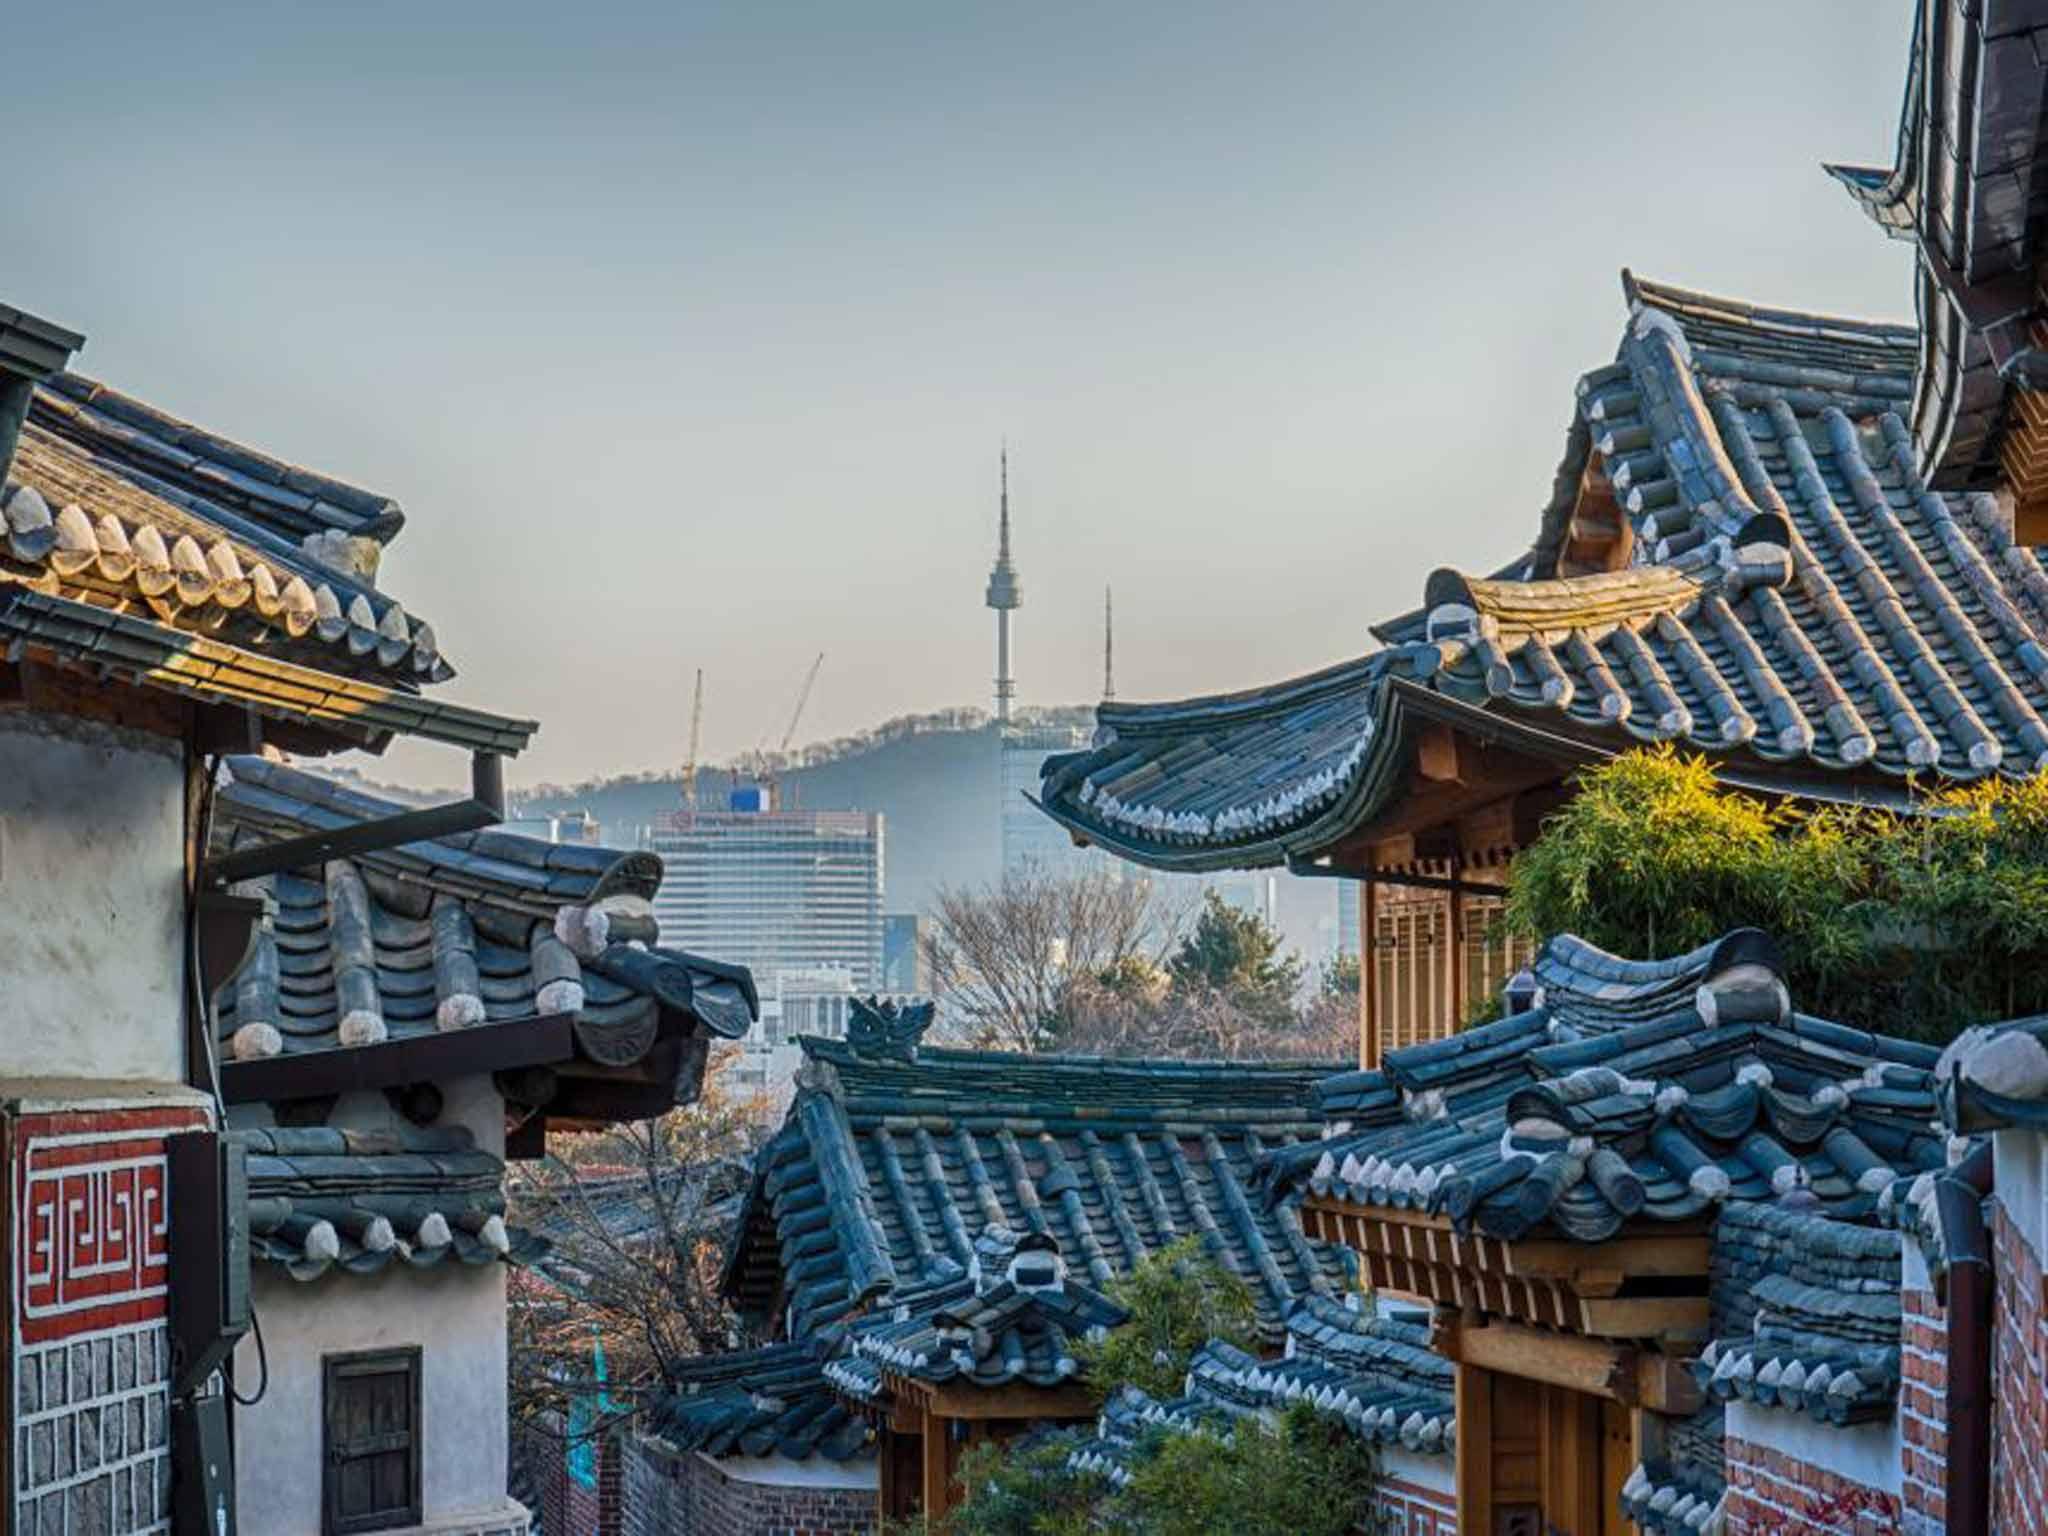 South Korea: From Seoul and Jeju to traditional villages